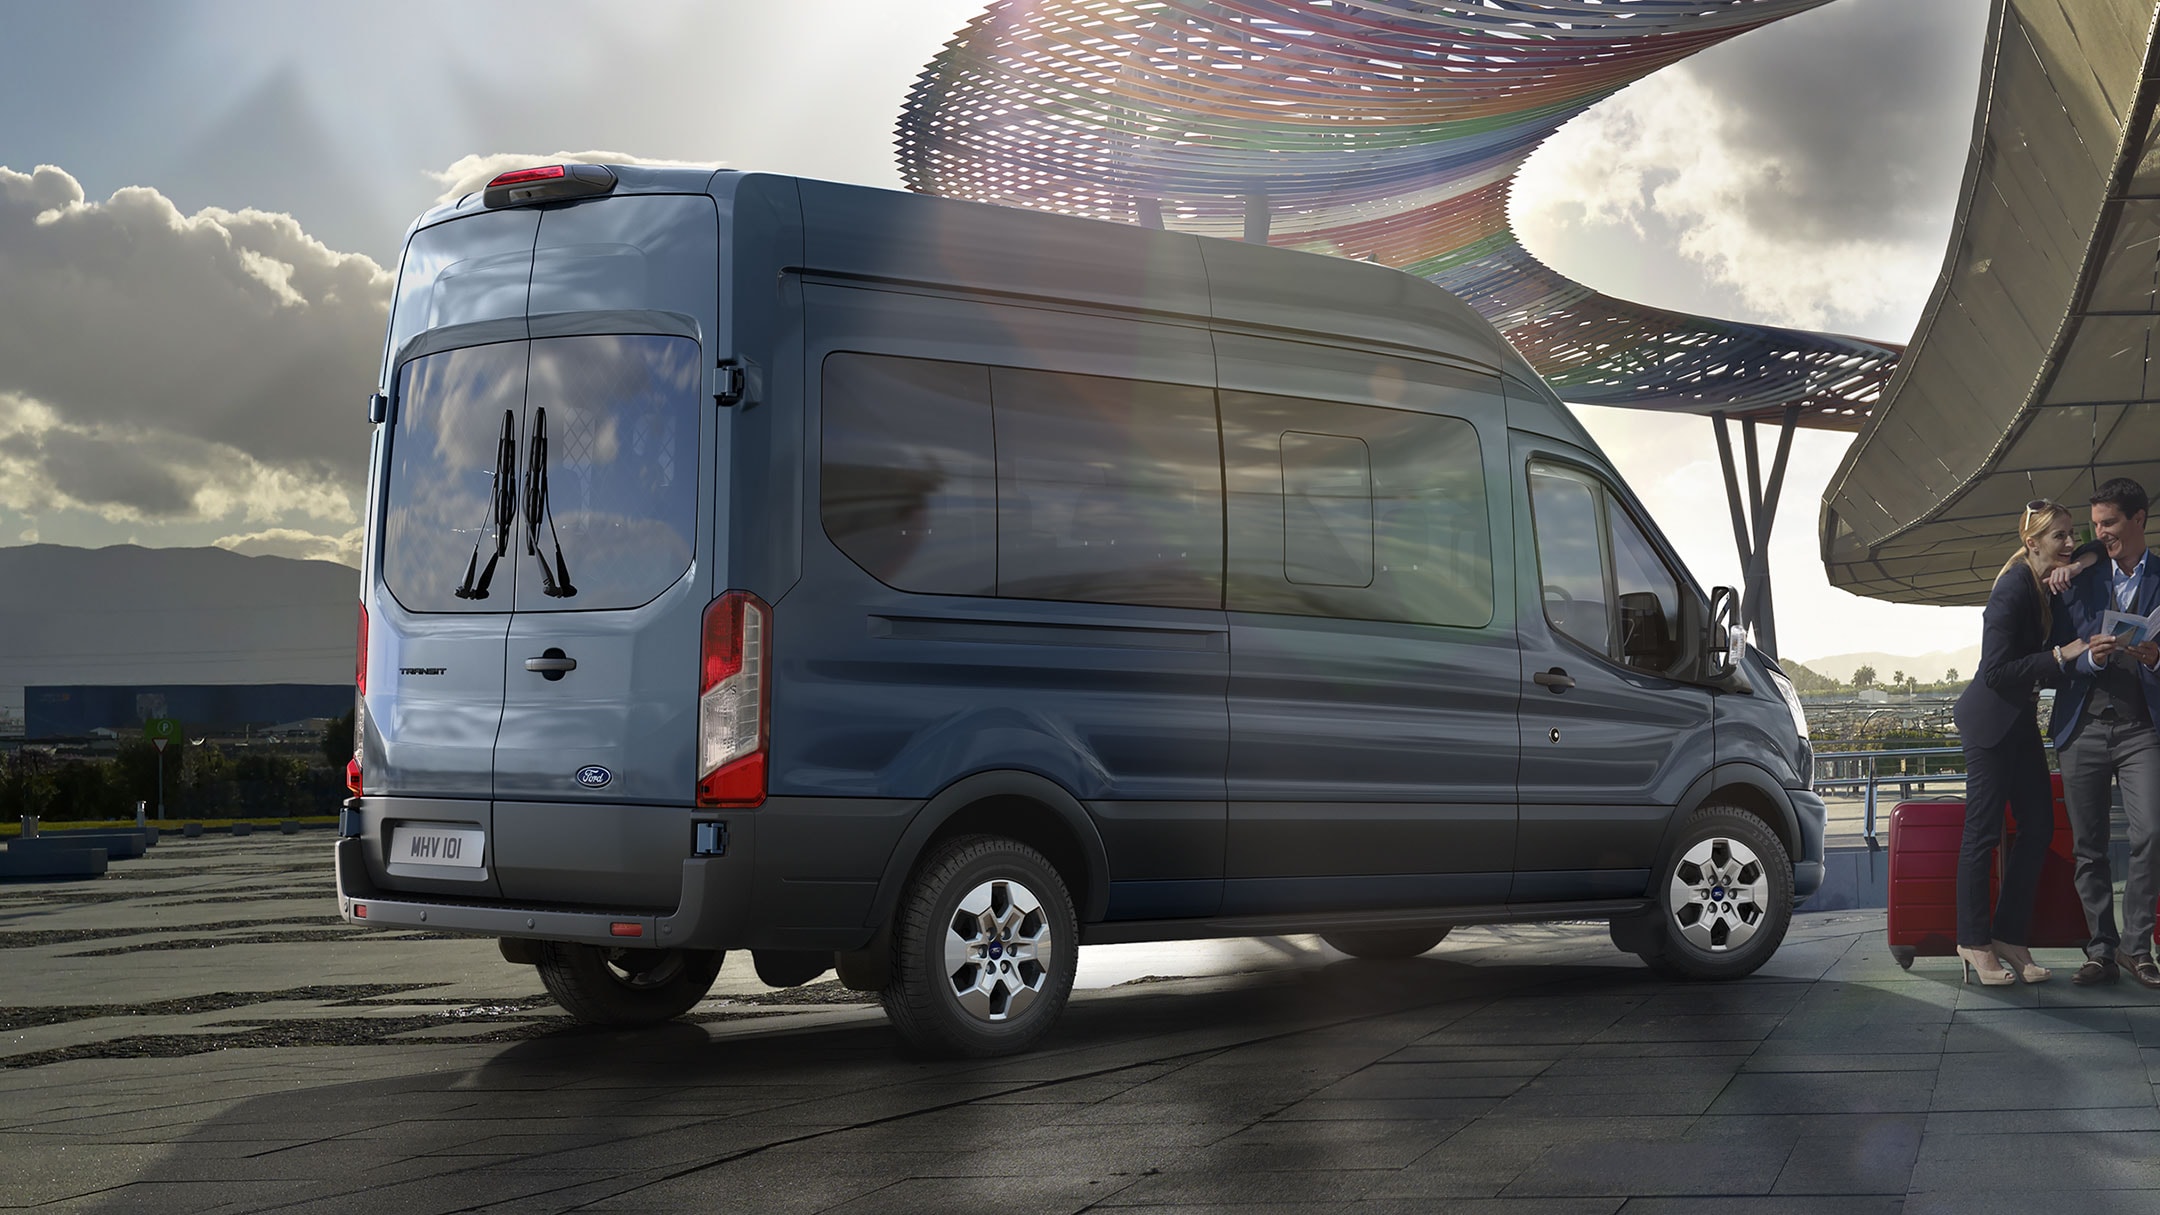 Rear view of the new Ford Transit Minibus